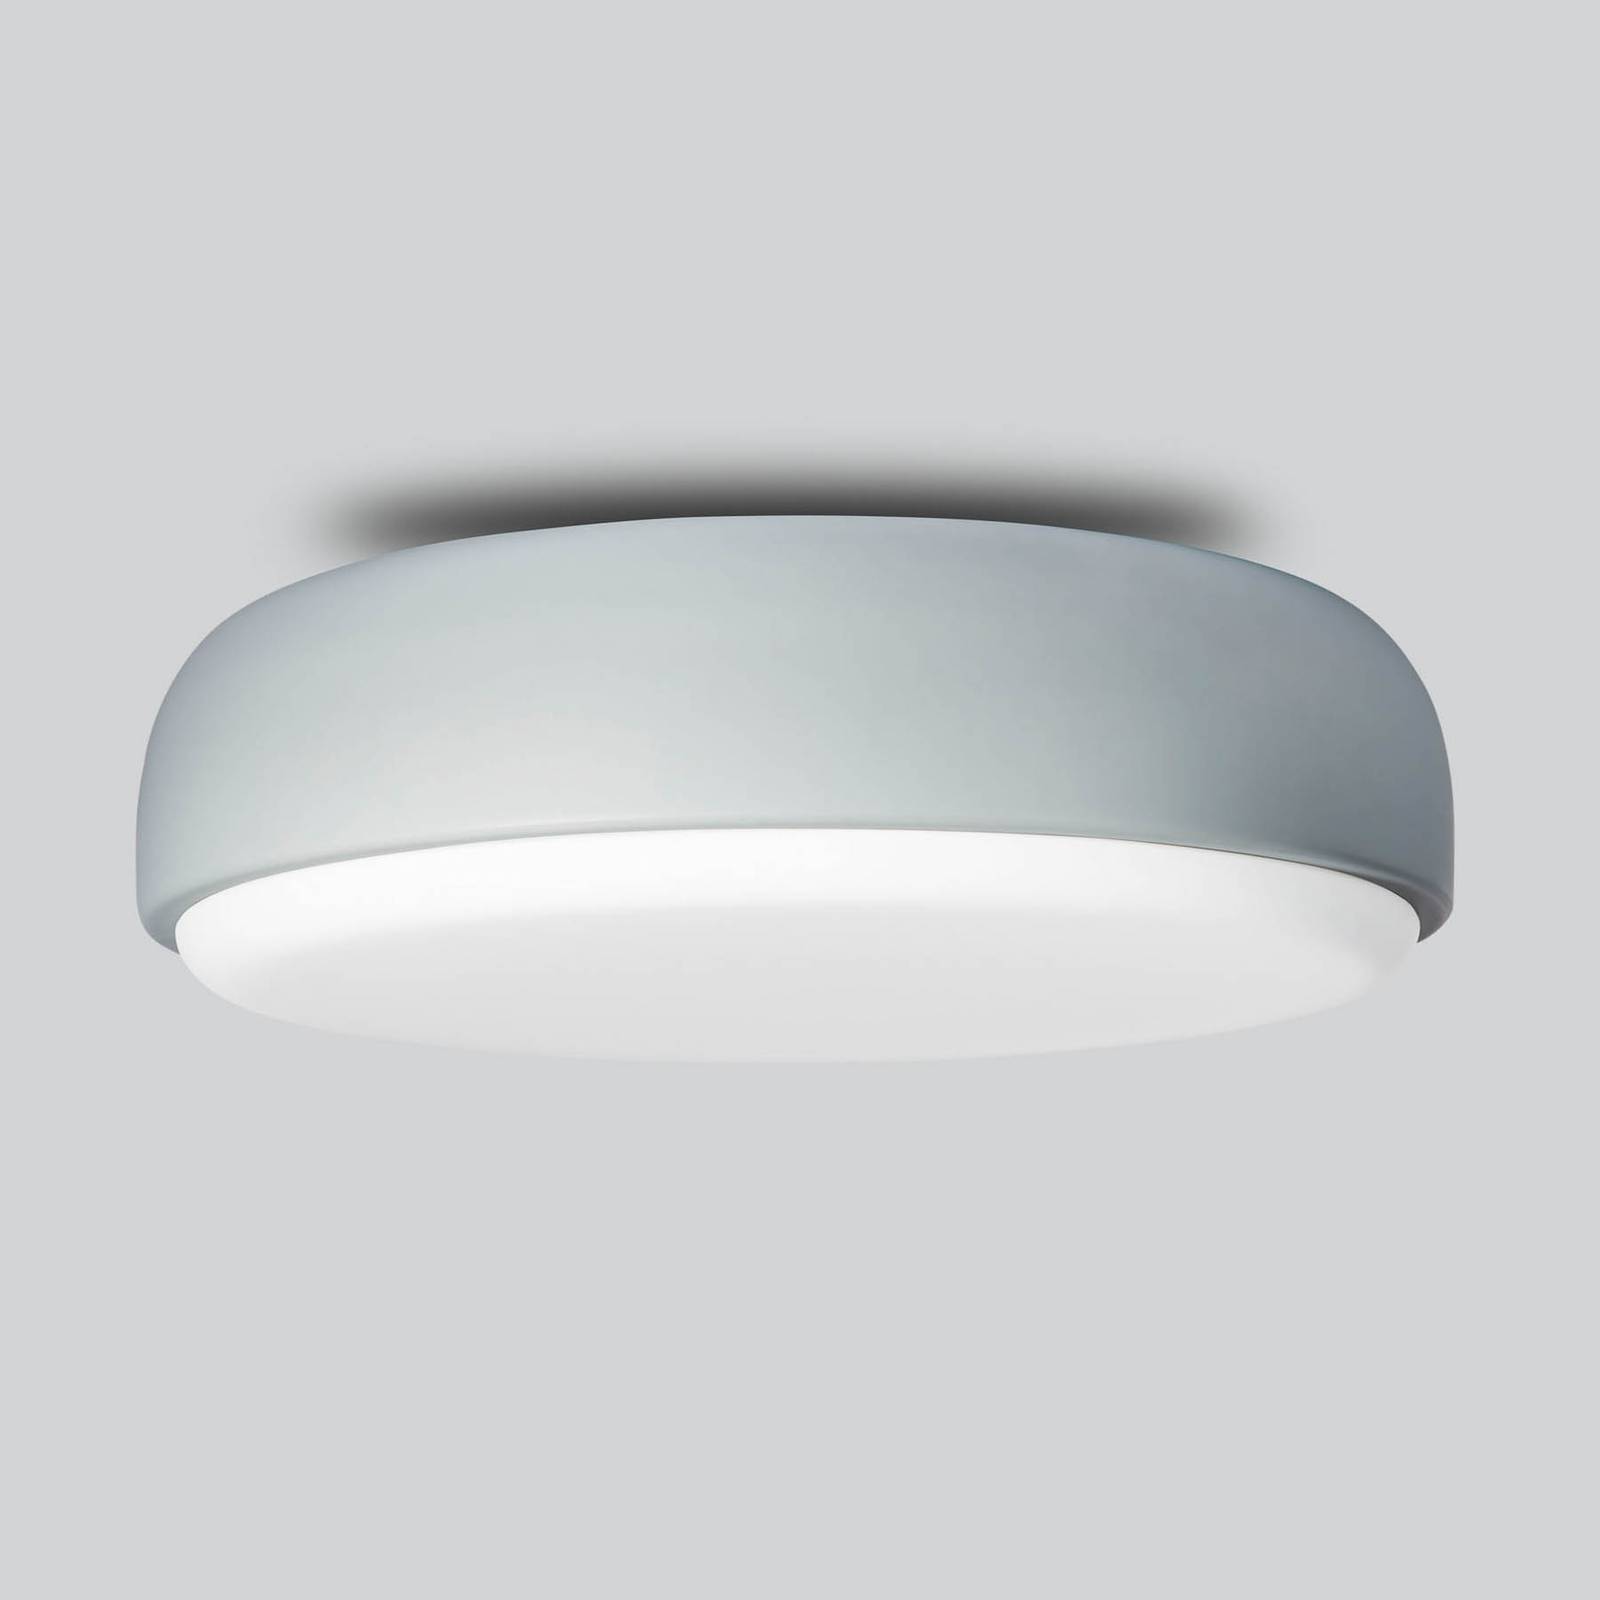 Northern Over Me ceiling light, pale blue 50 cm